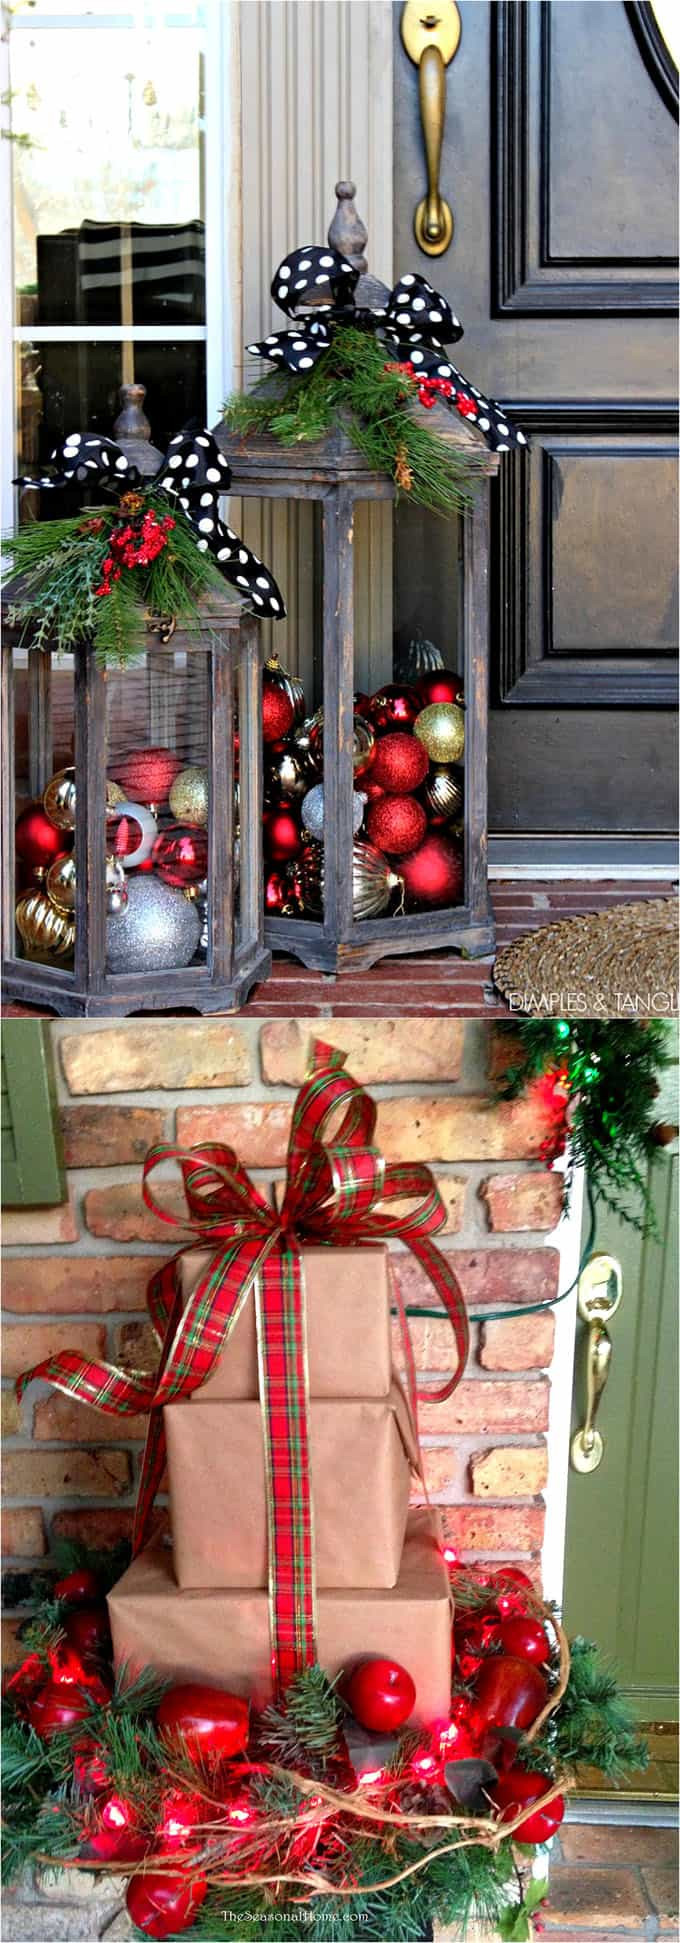 Build Outdoor Christmas Decorations
 Gorgeous Outdoor Christmas Decorations 32 Best Ideas